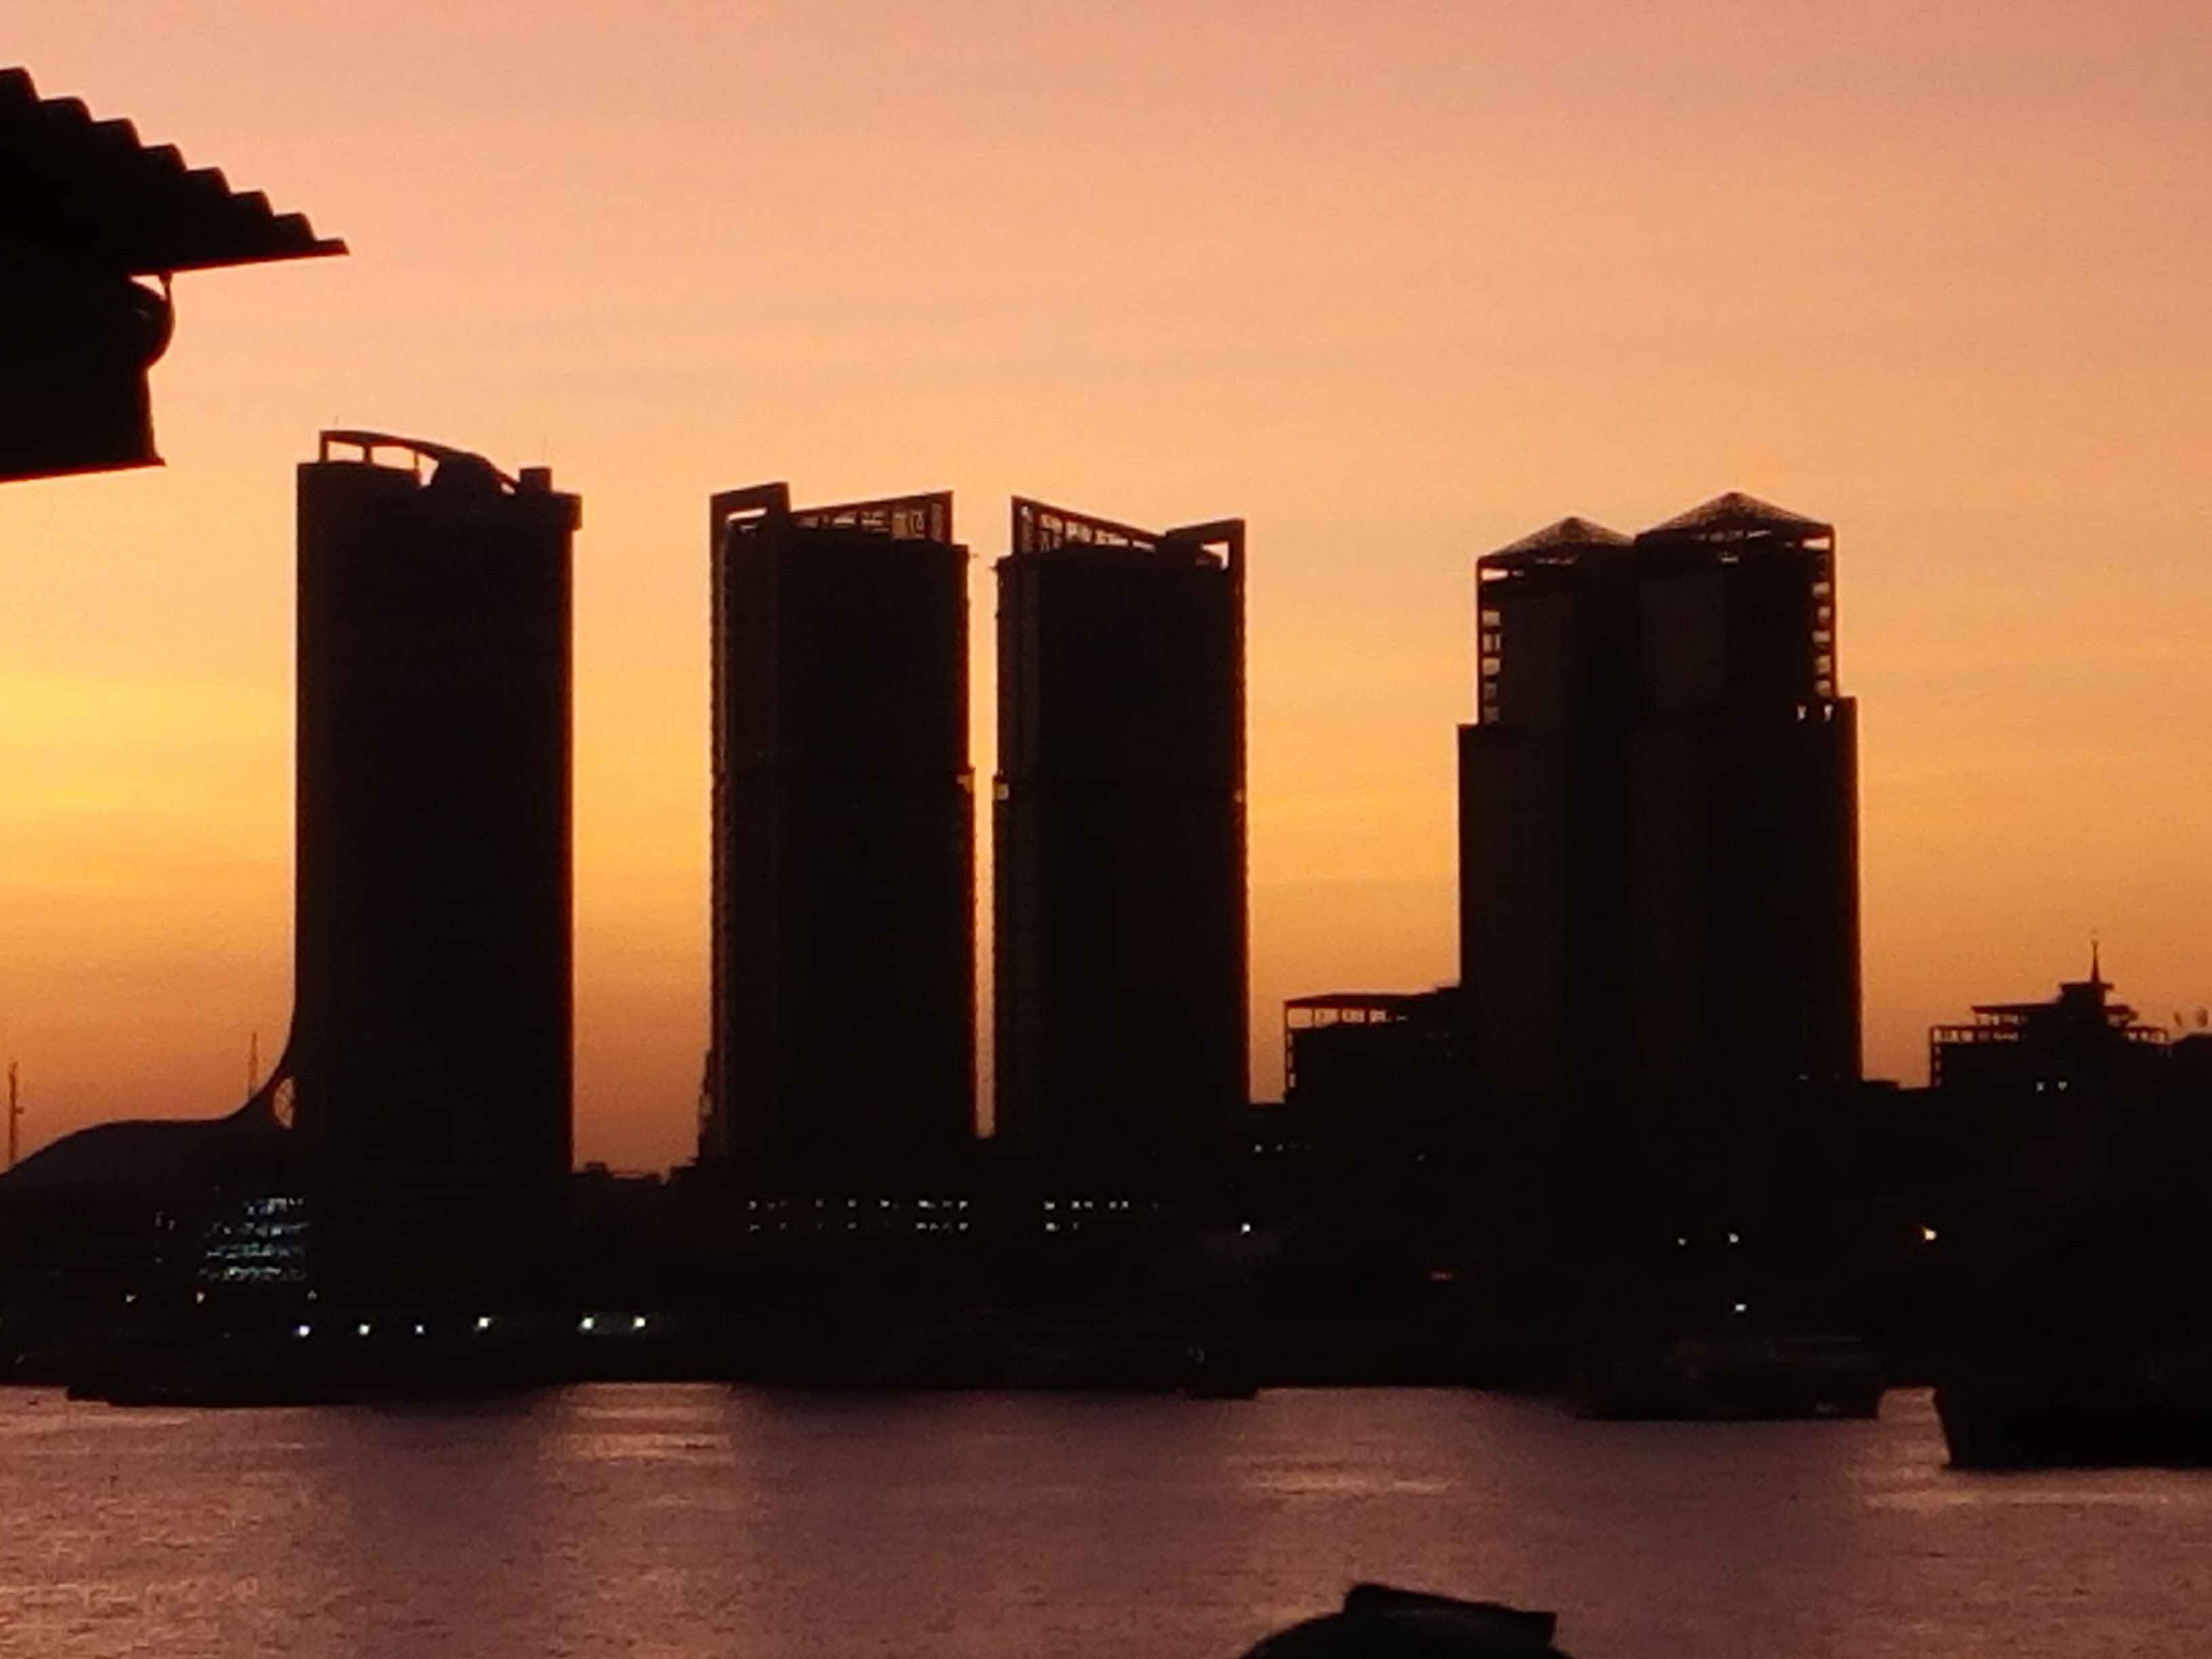 Sunset in Dar es Salaam, one of the best shots of my armature photography career